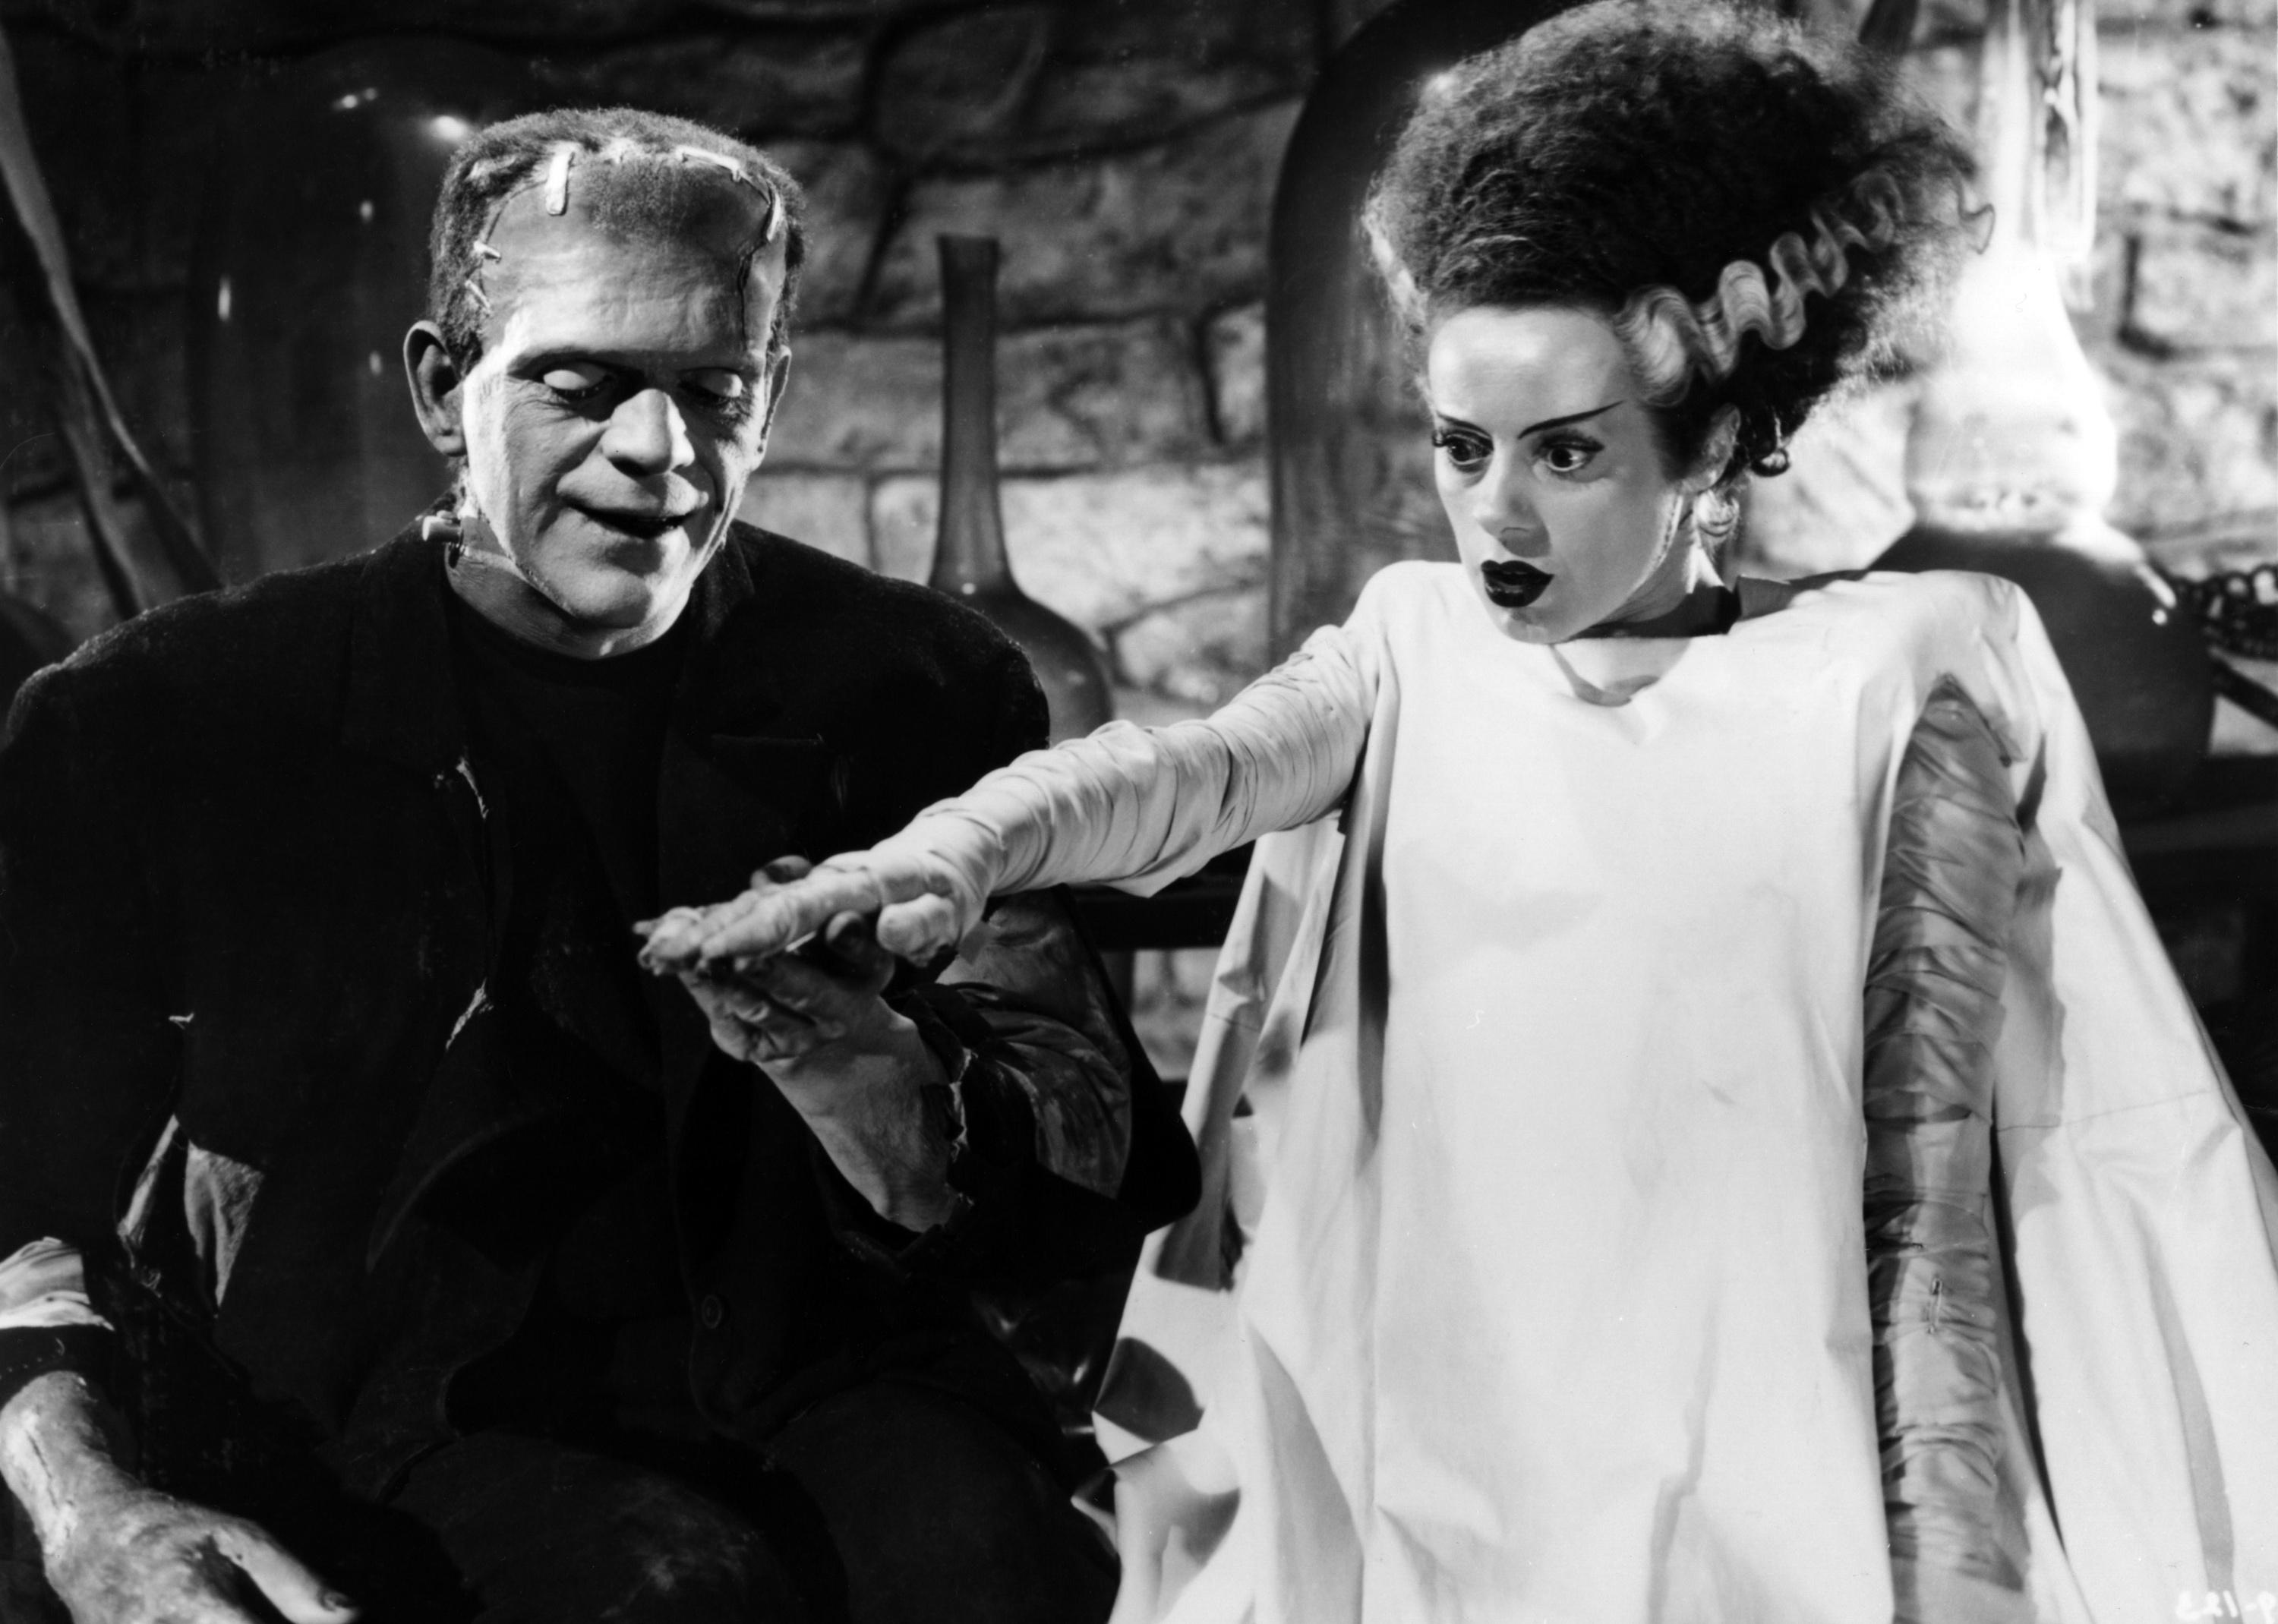 Actors Boris Karloff and Elsa Lanchester in a scene from ‘The Bride of Frankenstein.